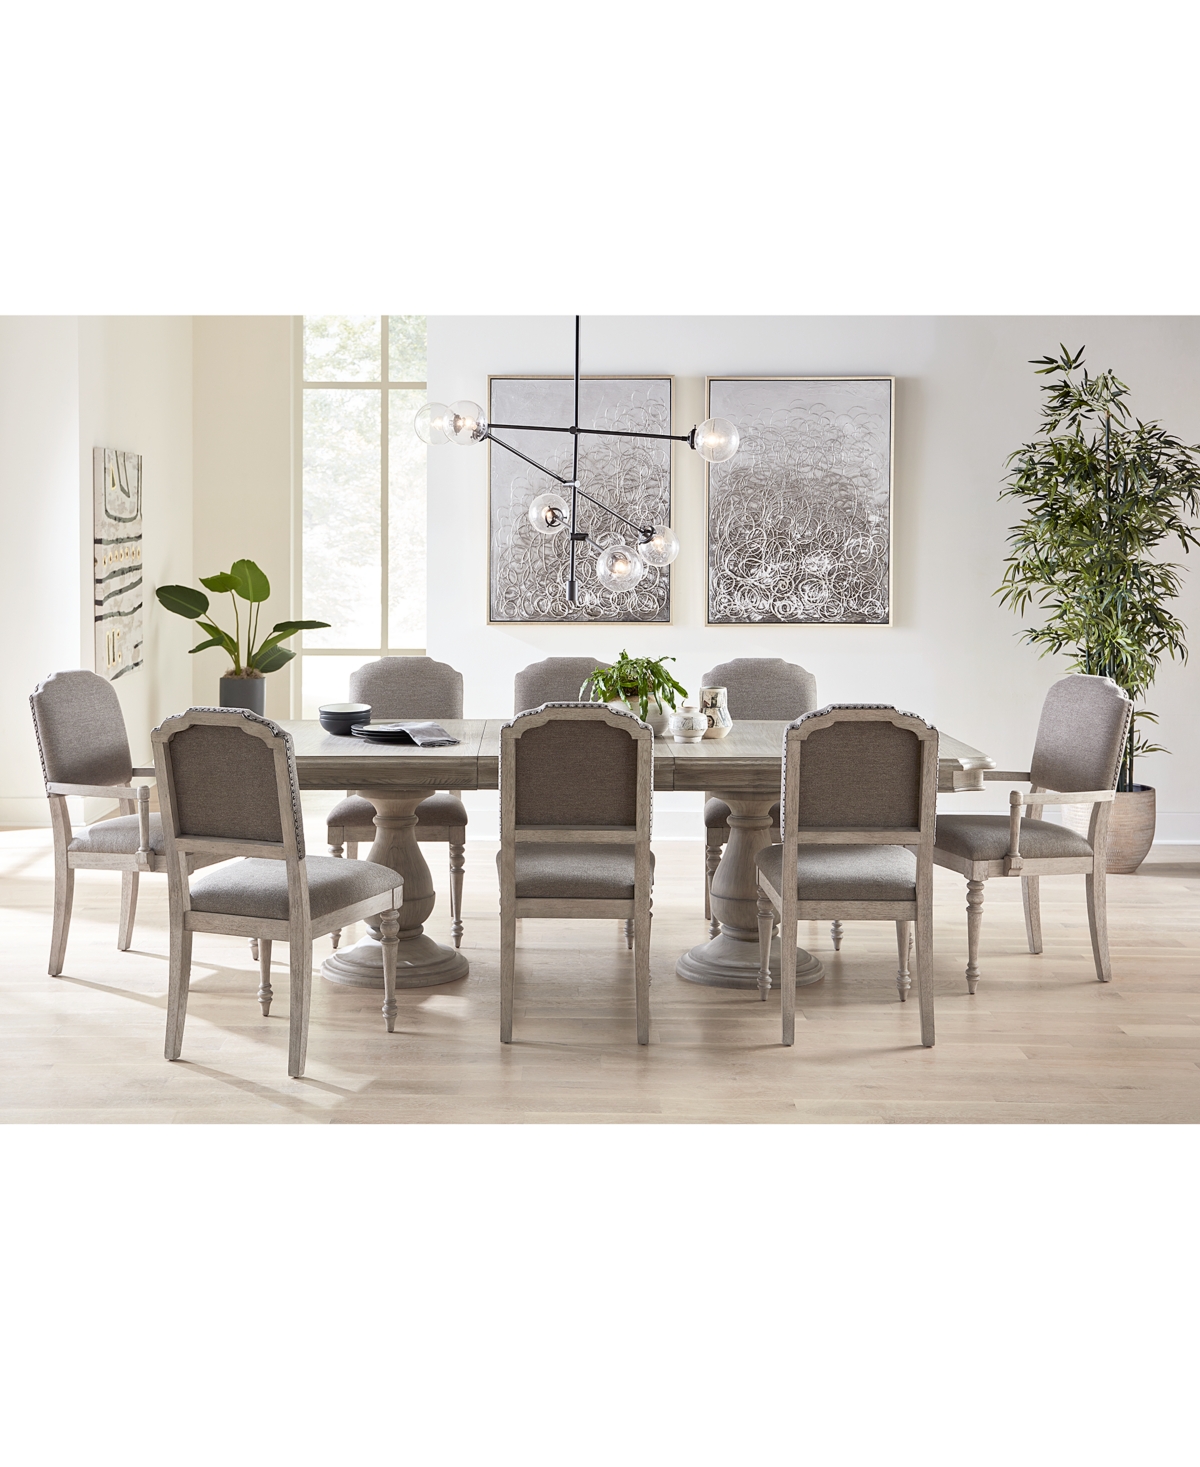 Anniston Dining 9-Pc. Set (Table, 6 Side Chairs, 2 Arm Chairs)